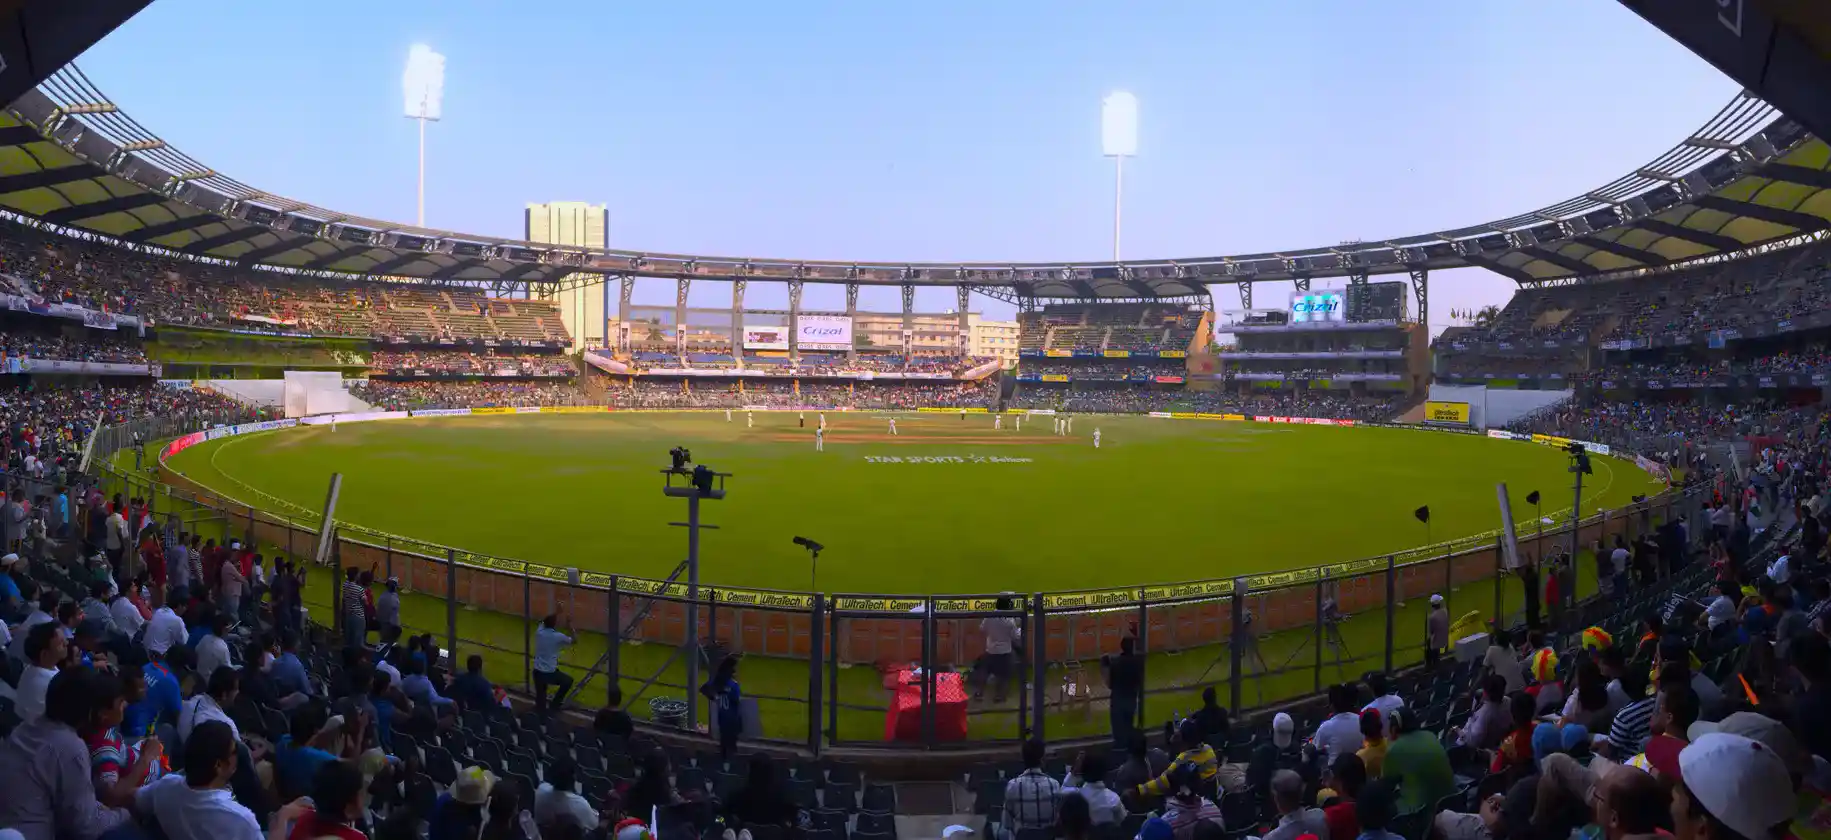 A photo of a large cricket stadium with green outfield, floodlights, and stands.